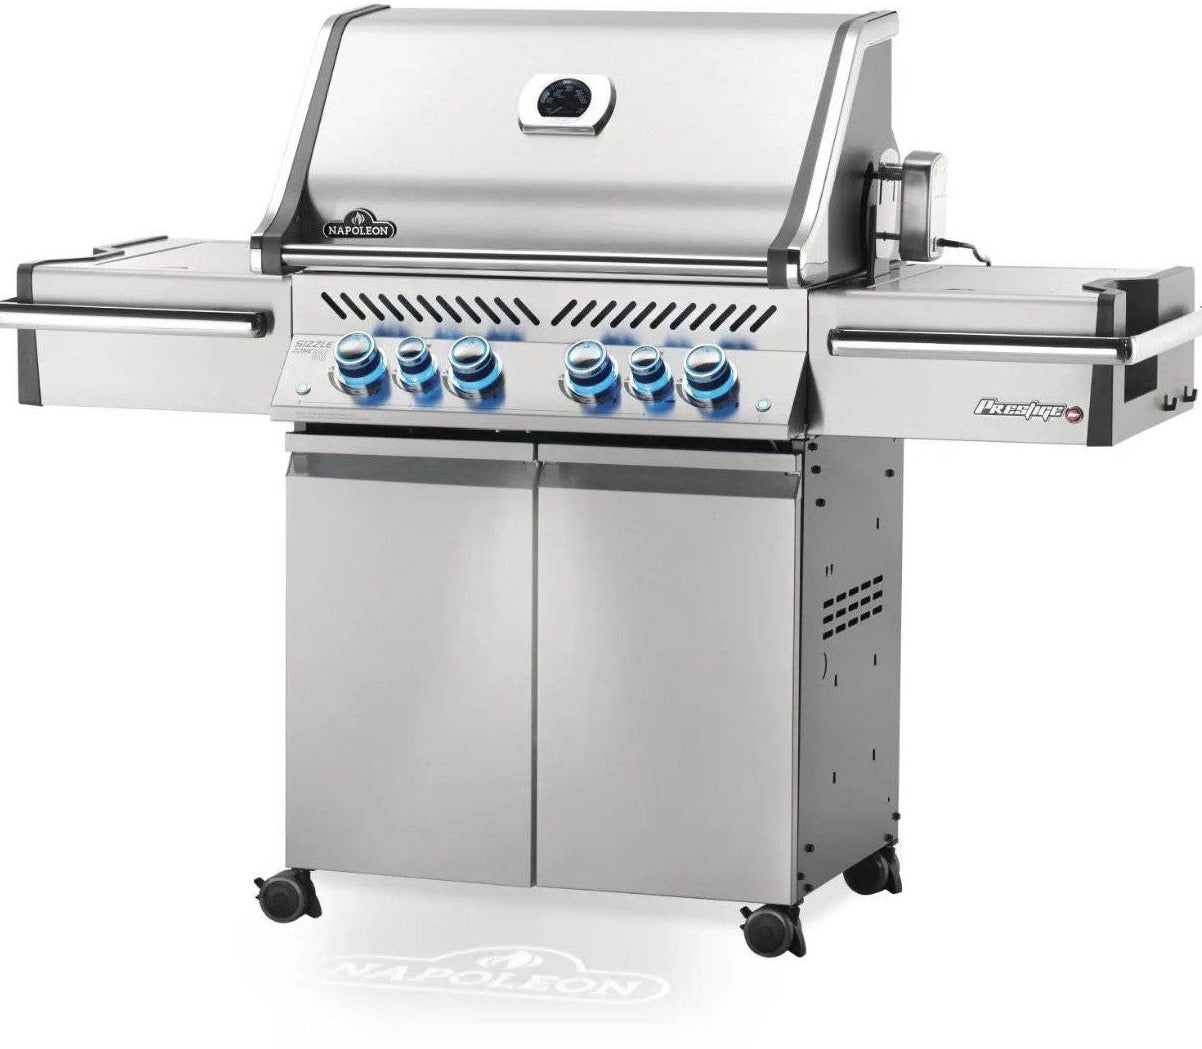 Napoleon Prestige PRO 500 Natural Gas Grill w/ Rear & Side Infrared Burners PRO500RSIBNSS-3 - Texas Star Grill Shop